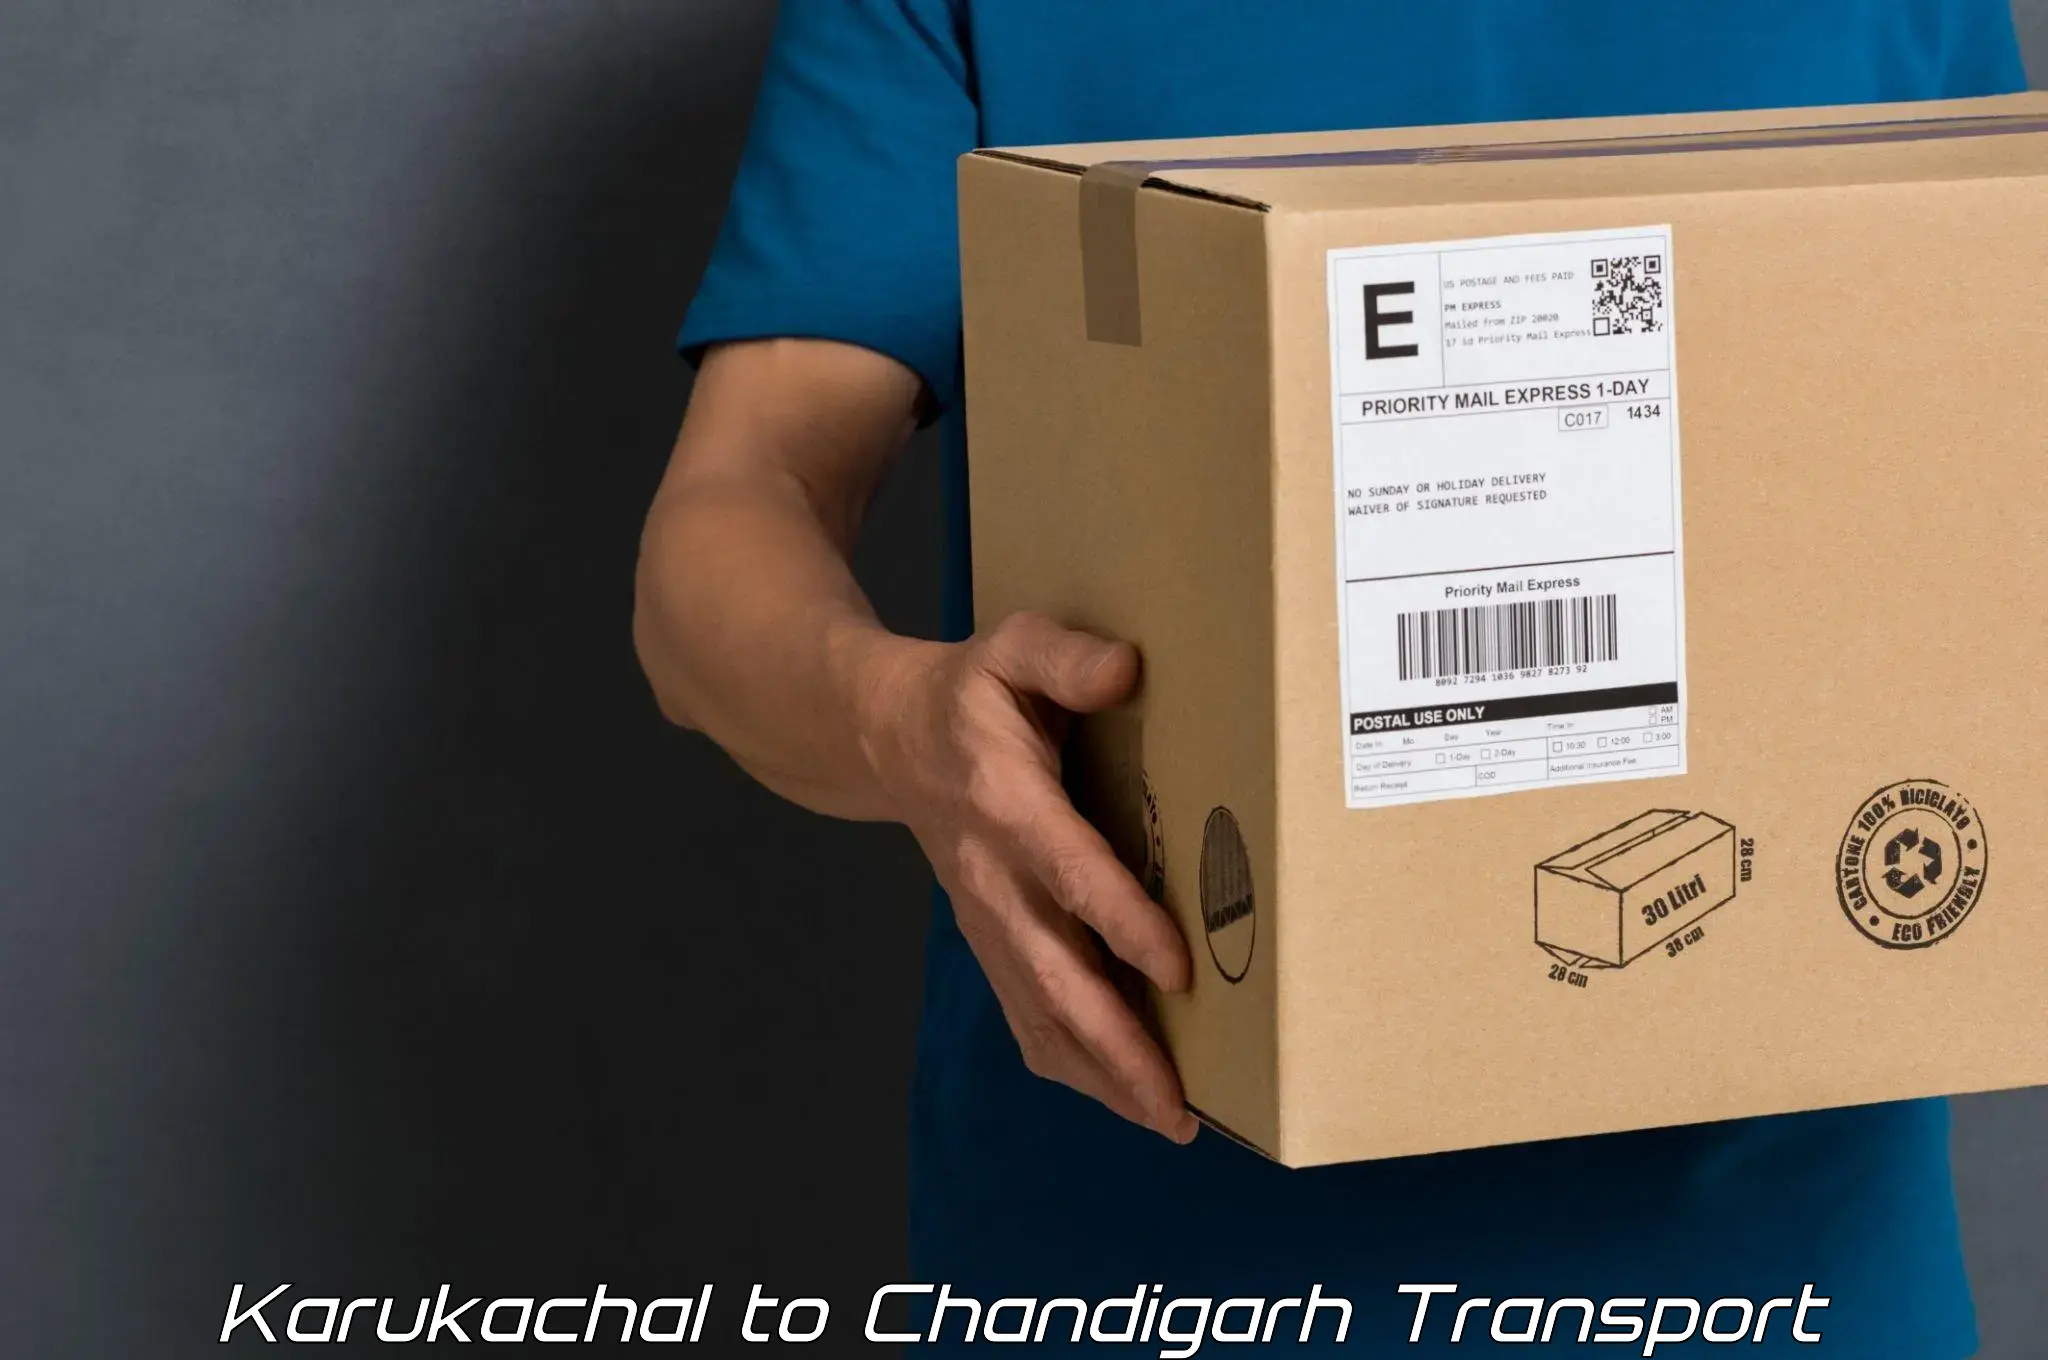 Part load transport service in India Karukachal to Chandigarh